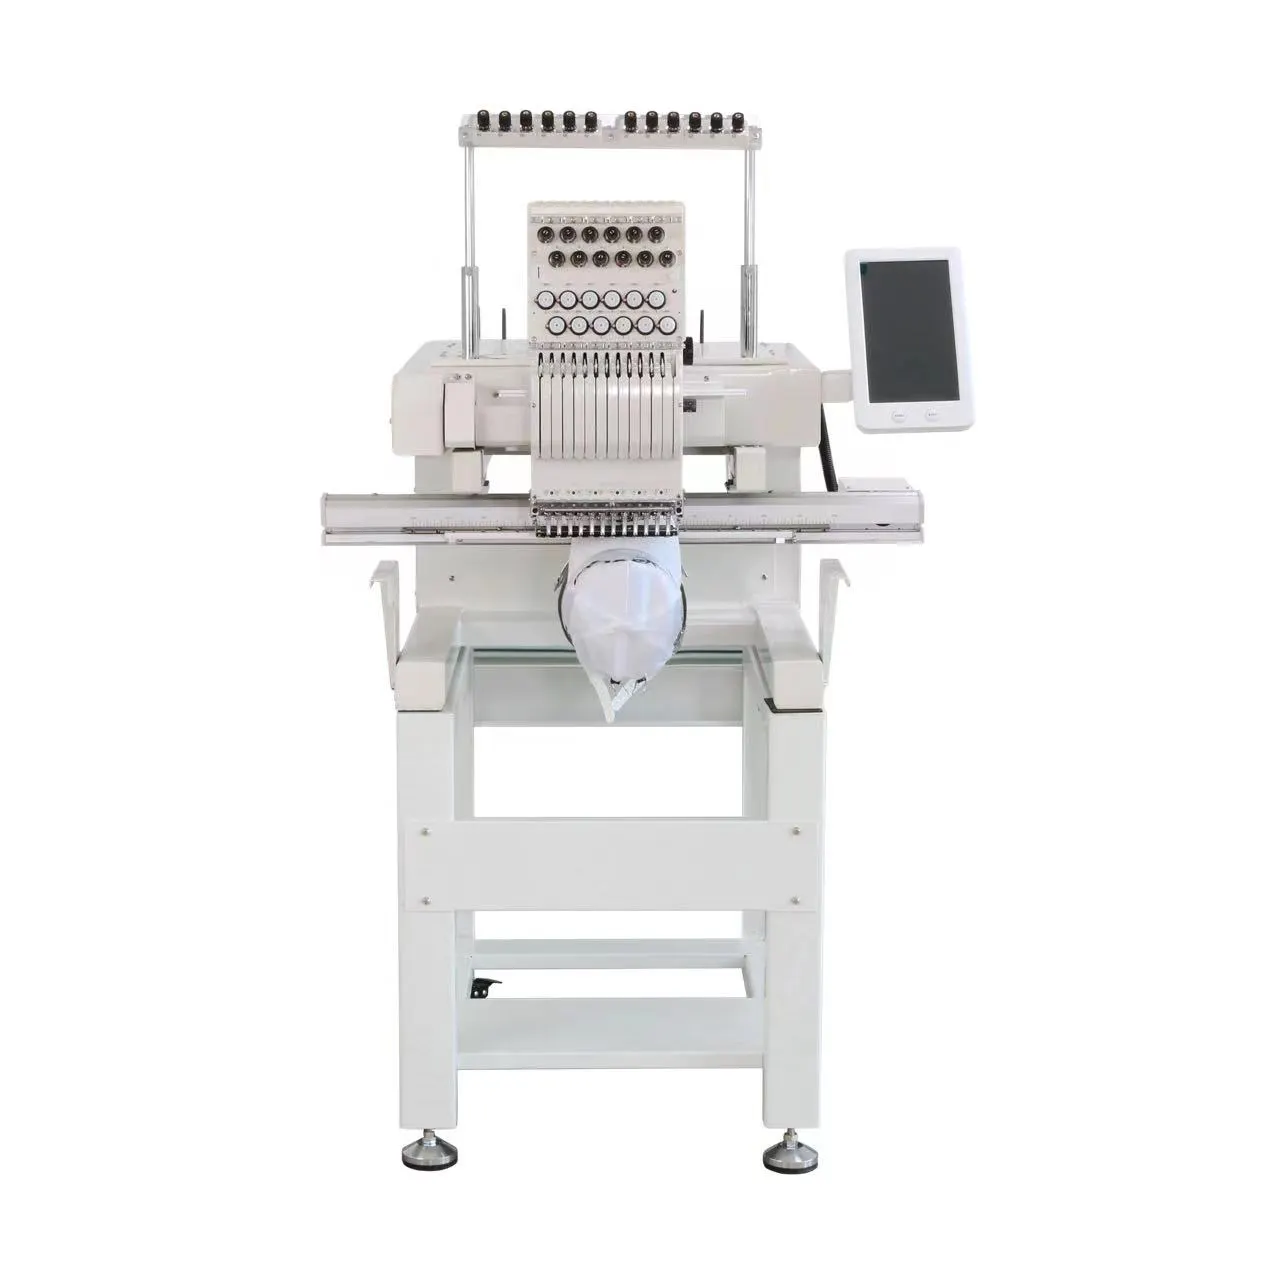 High quality small single two head 9 12 needles embroidery sewing machine mini cap logo computer tshirt embroidery machine price